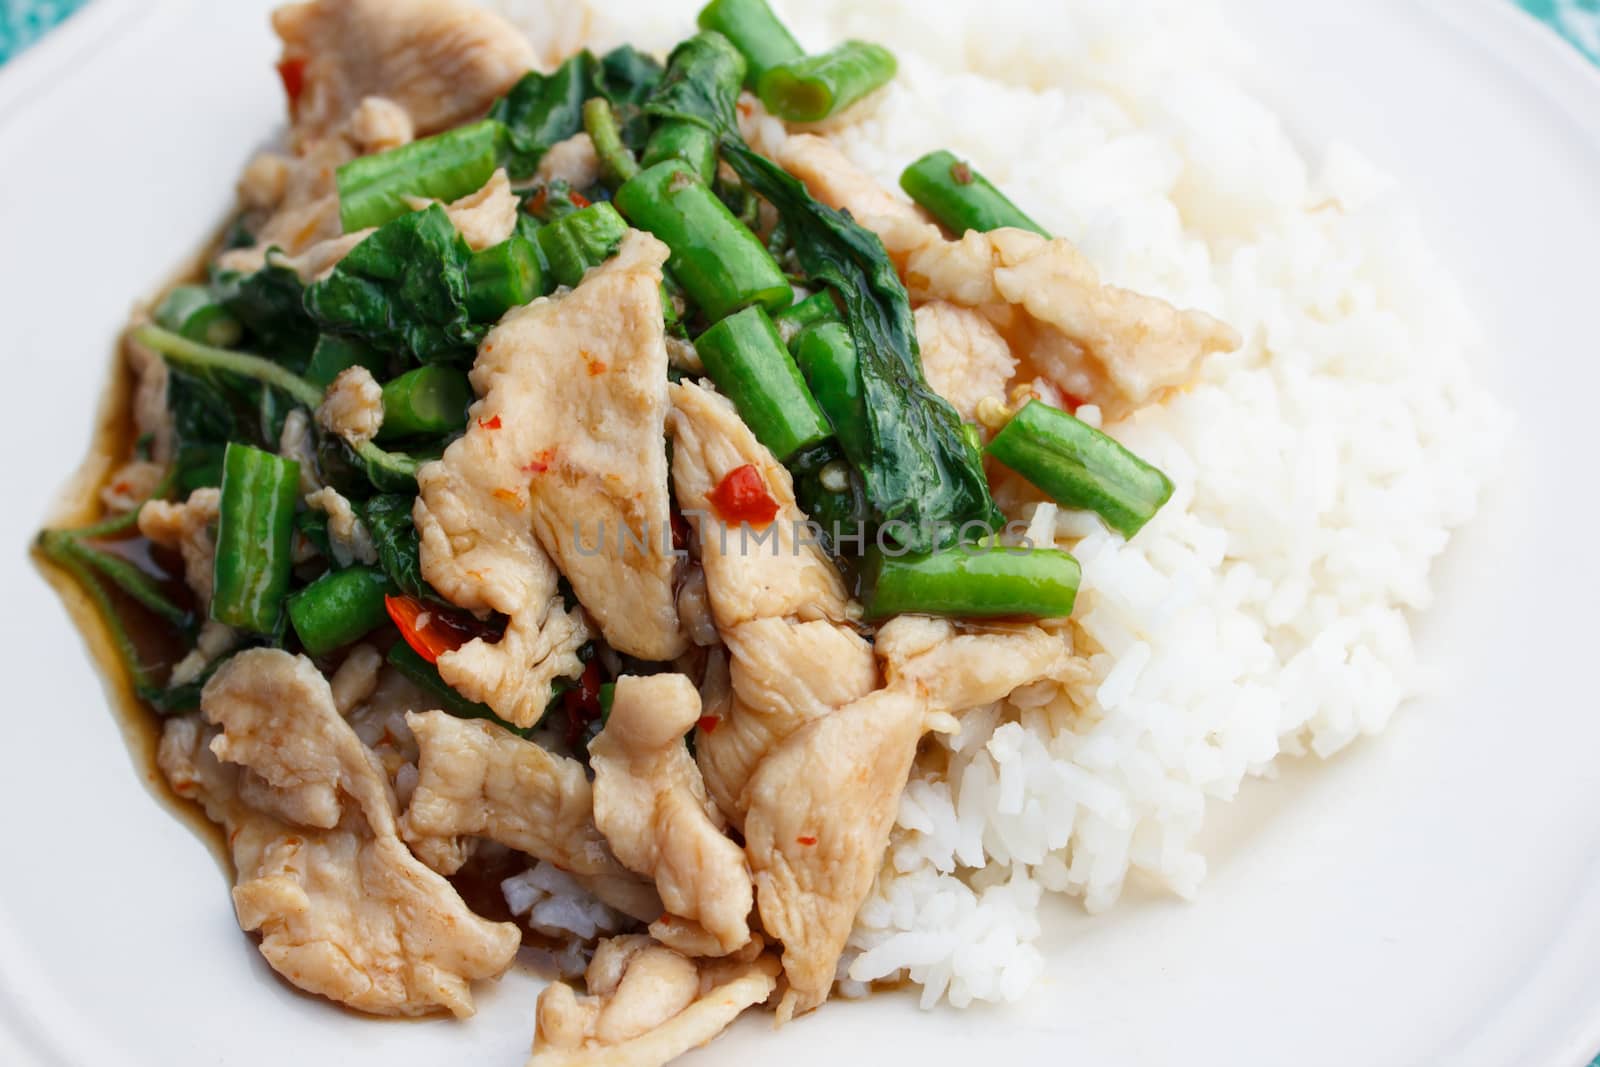 chicken fried in holy basil with yardlong bean on steamed rice  by vitawin